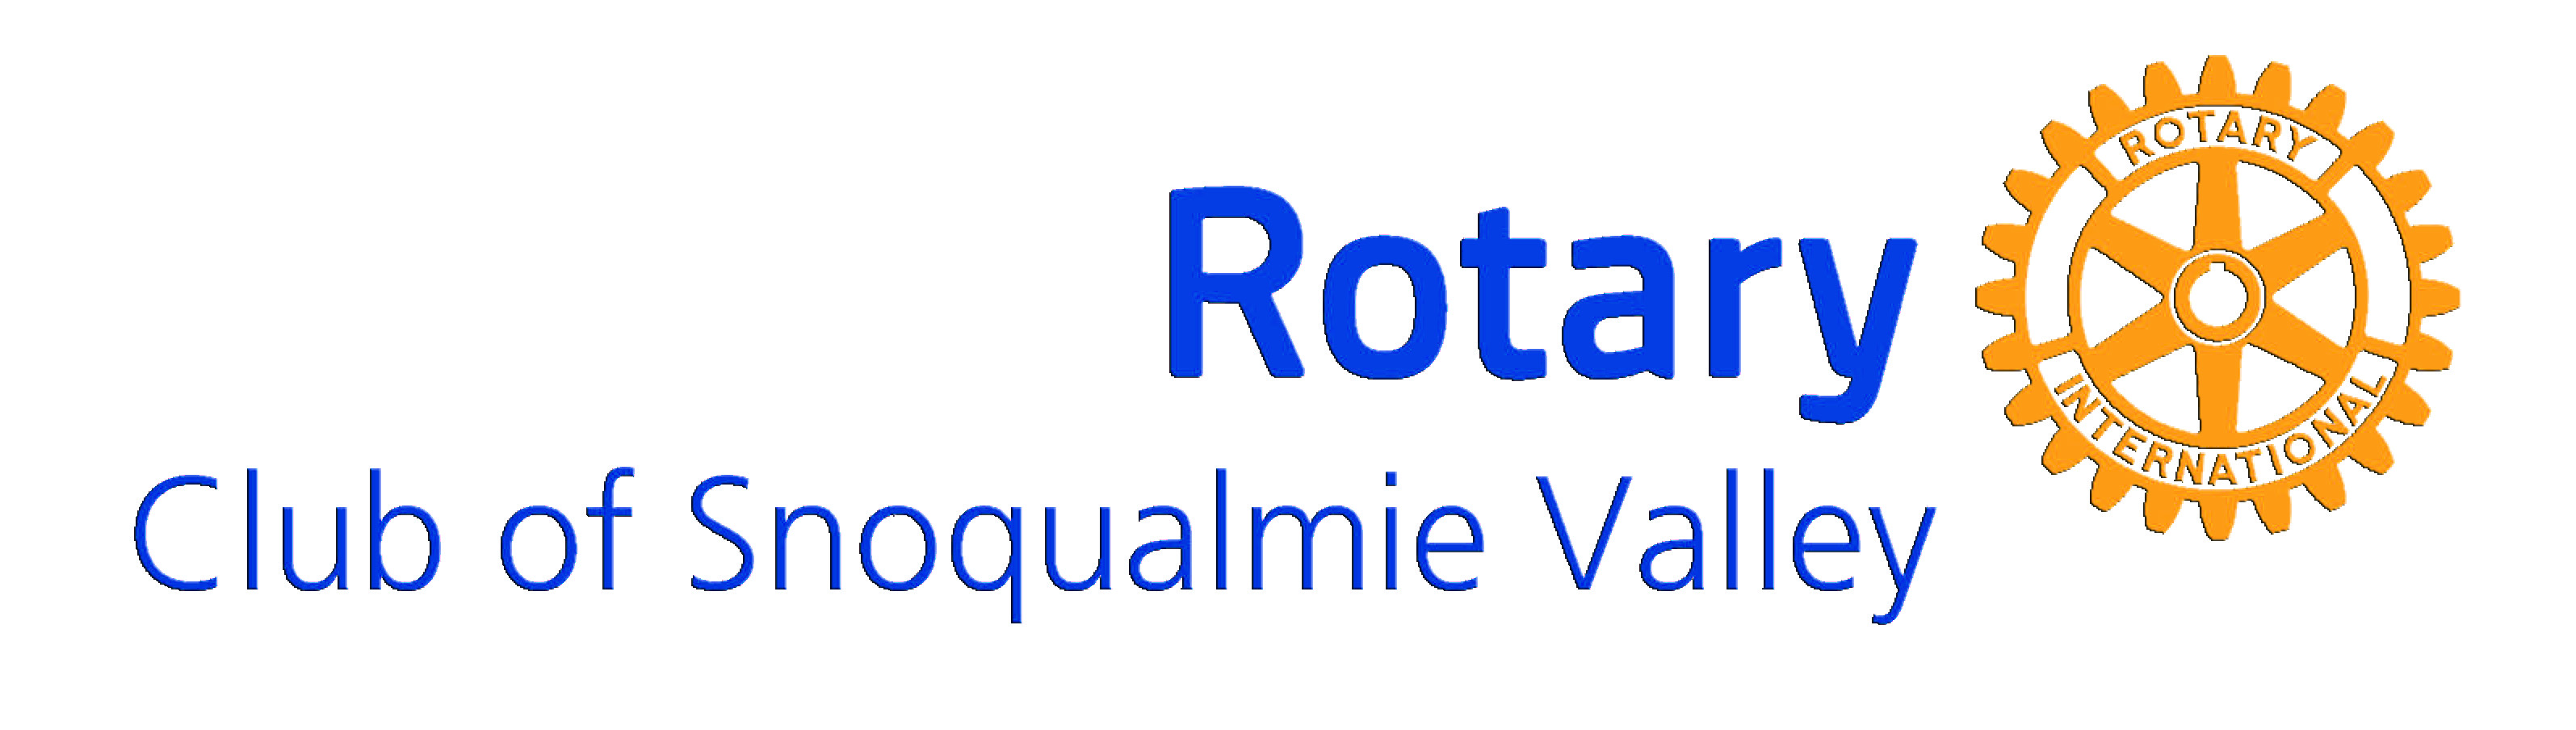 Rotary Club of Snoqualmie Valley logo